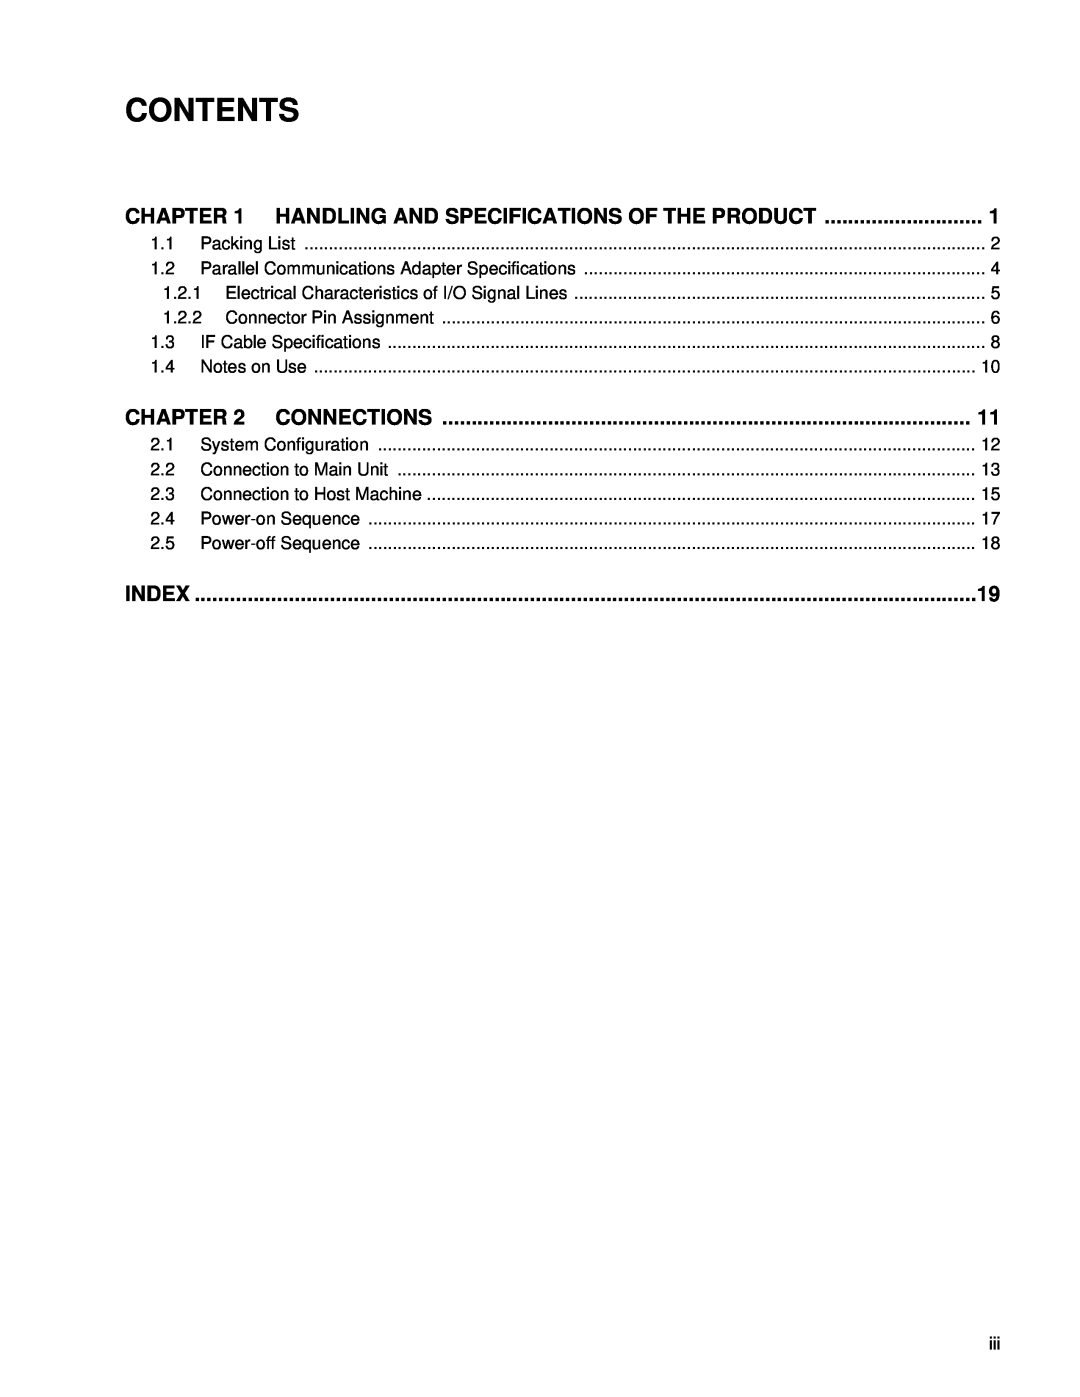 Fujitsu MB2142-03 manual Contents, Handling And Specifications Of The Product, Index 